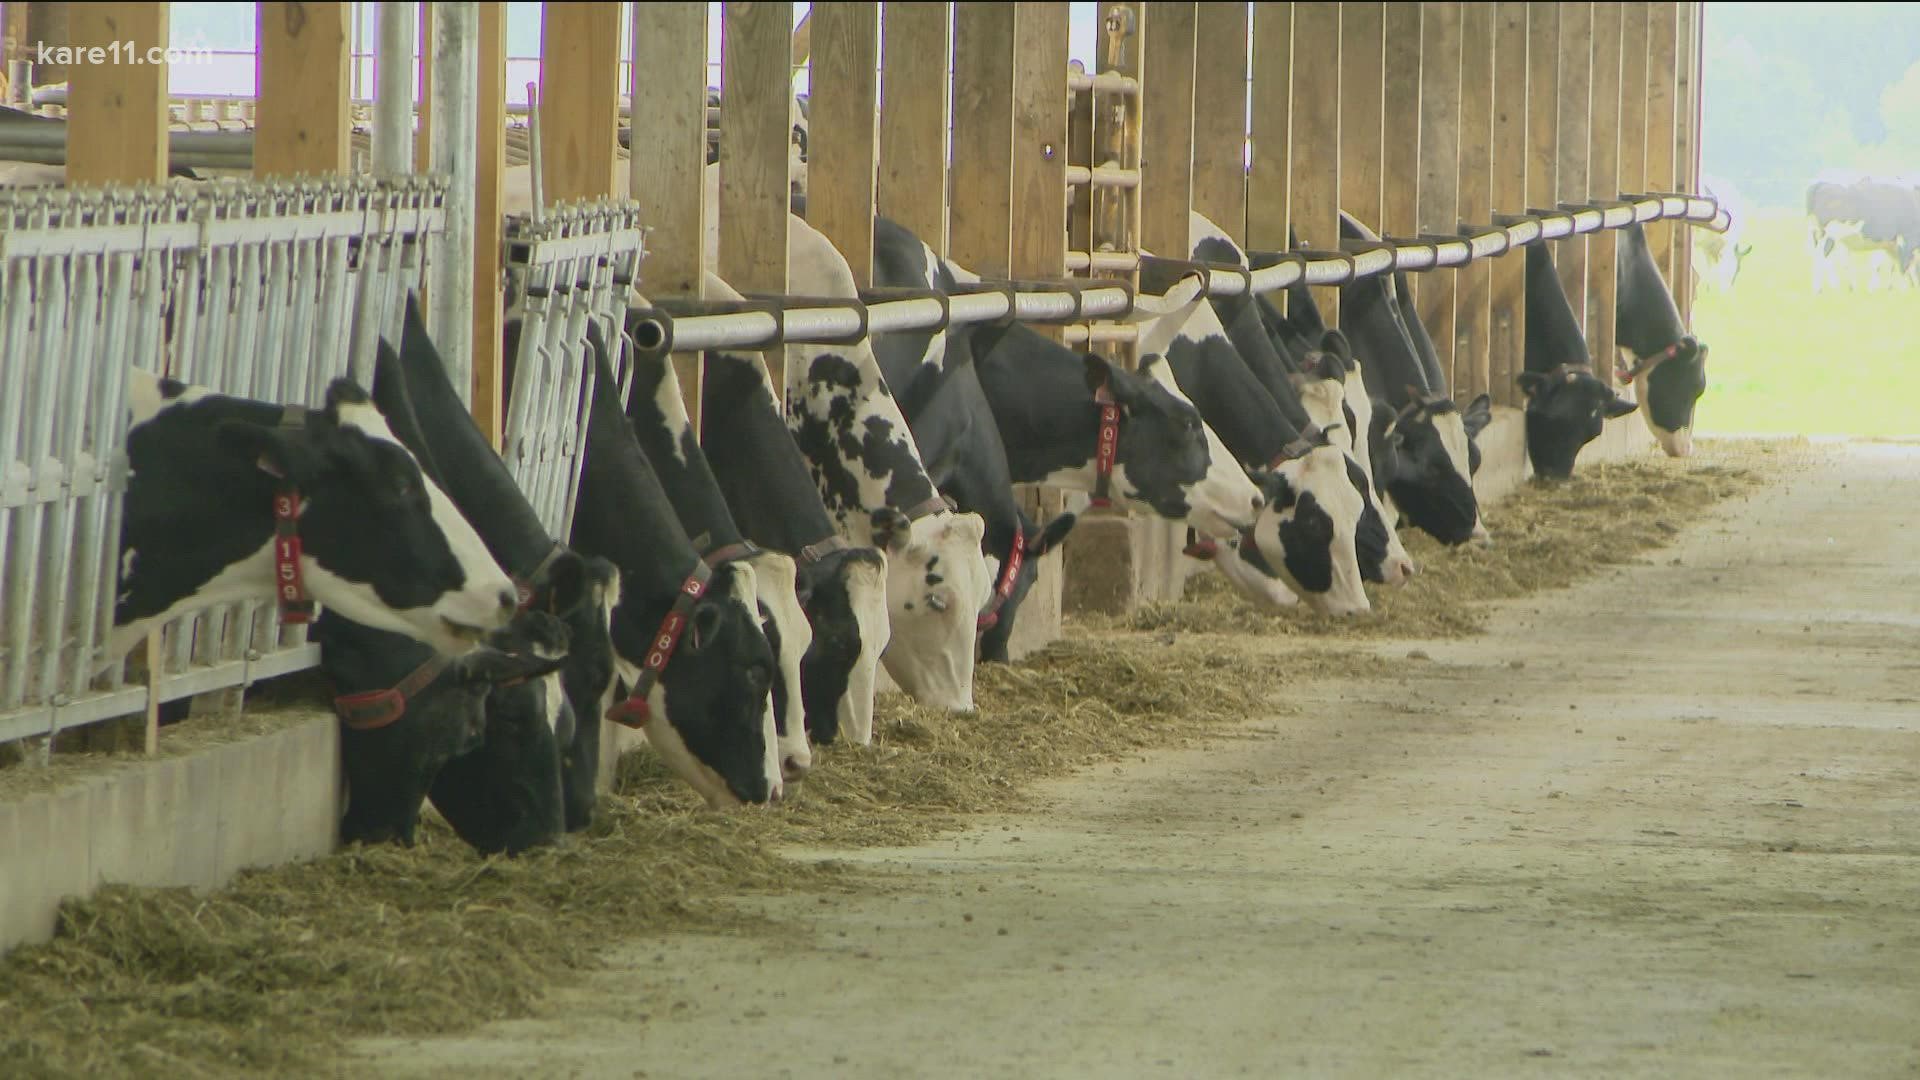 So many industries are evolving quickly, and farming is no exception. KARE 11's Kent Erdahl looks at a new shift in the agriculture industry.